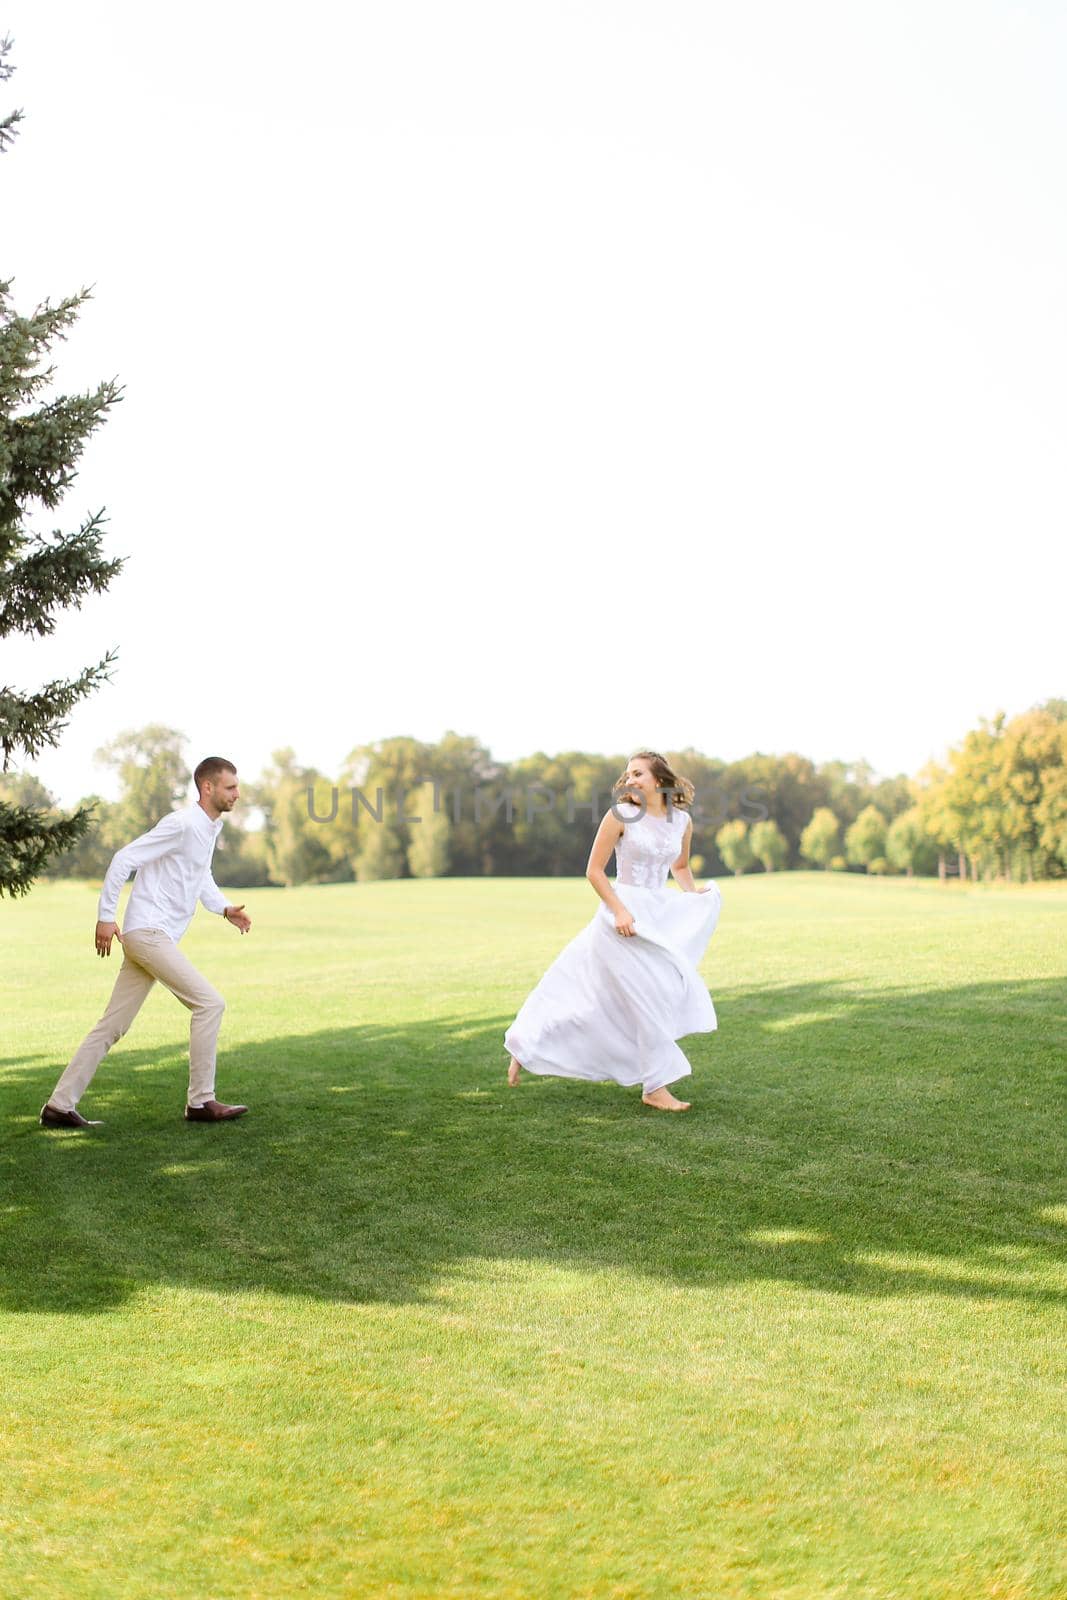 Groom and caucasian bride running and playing on grass. by sisterspro